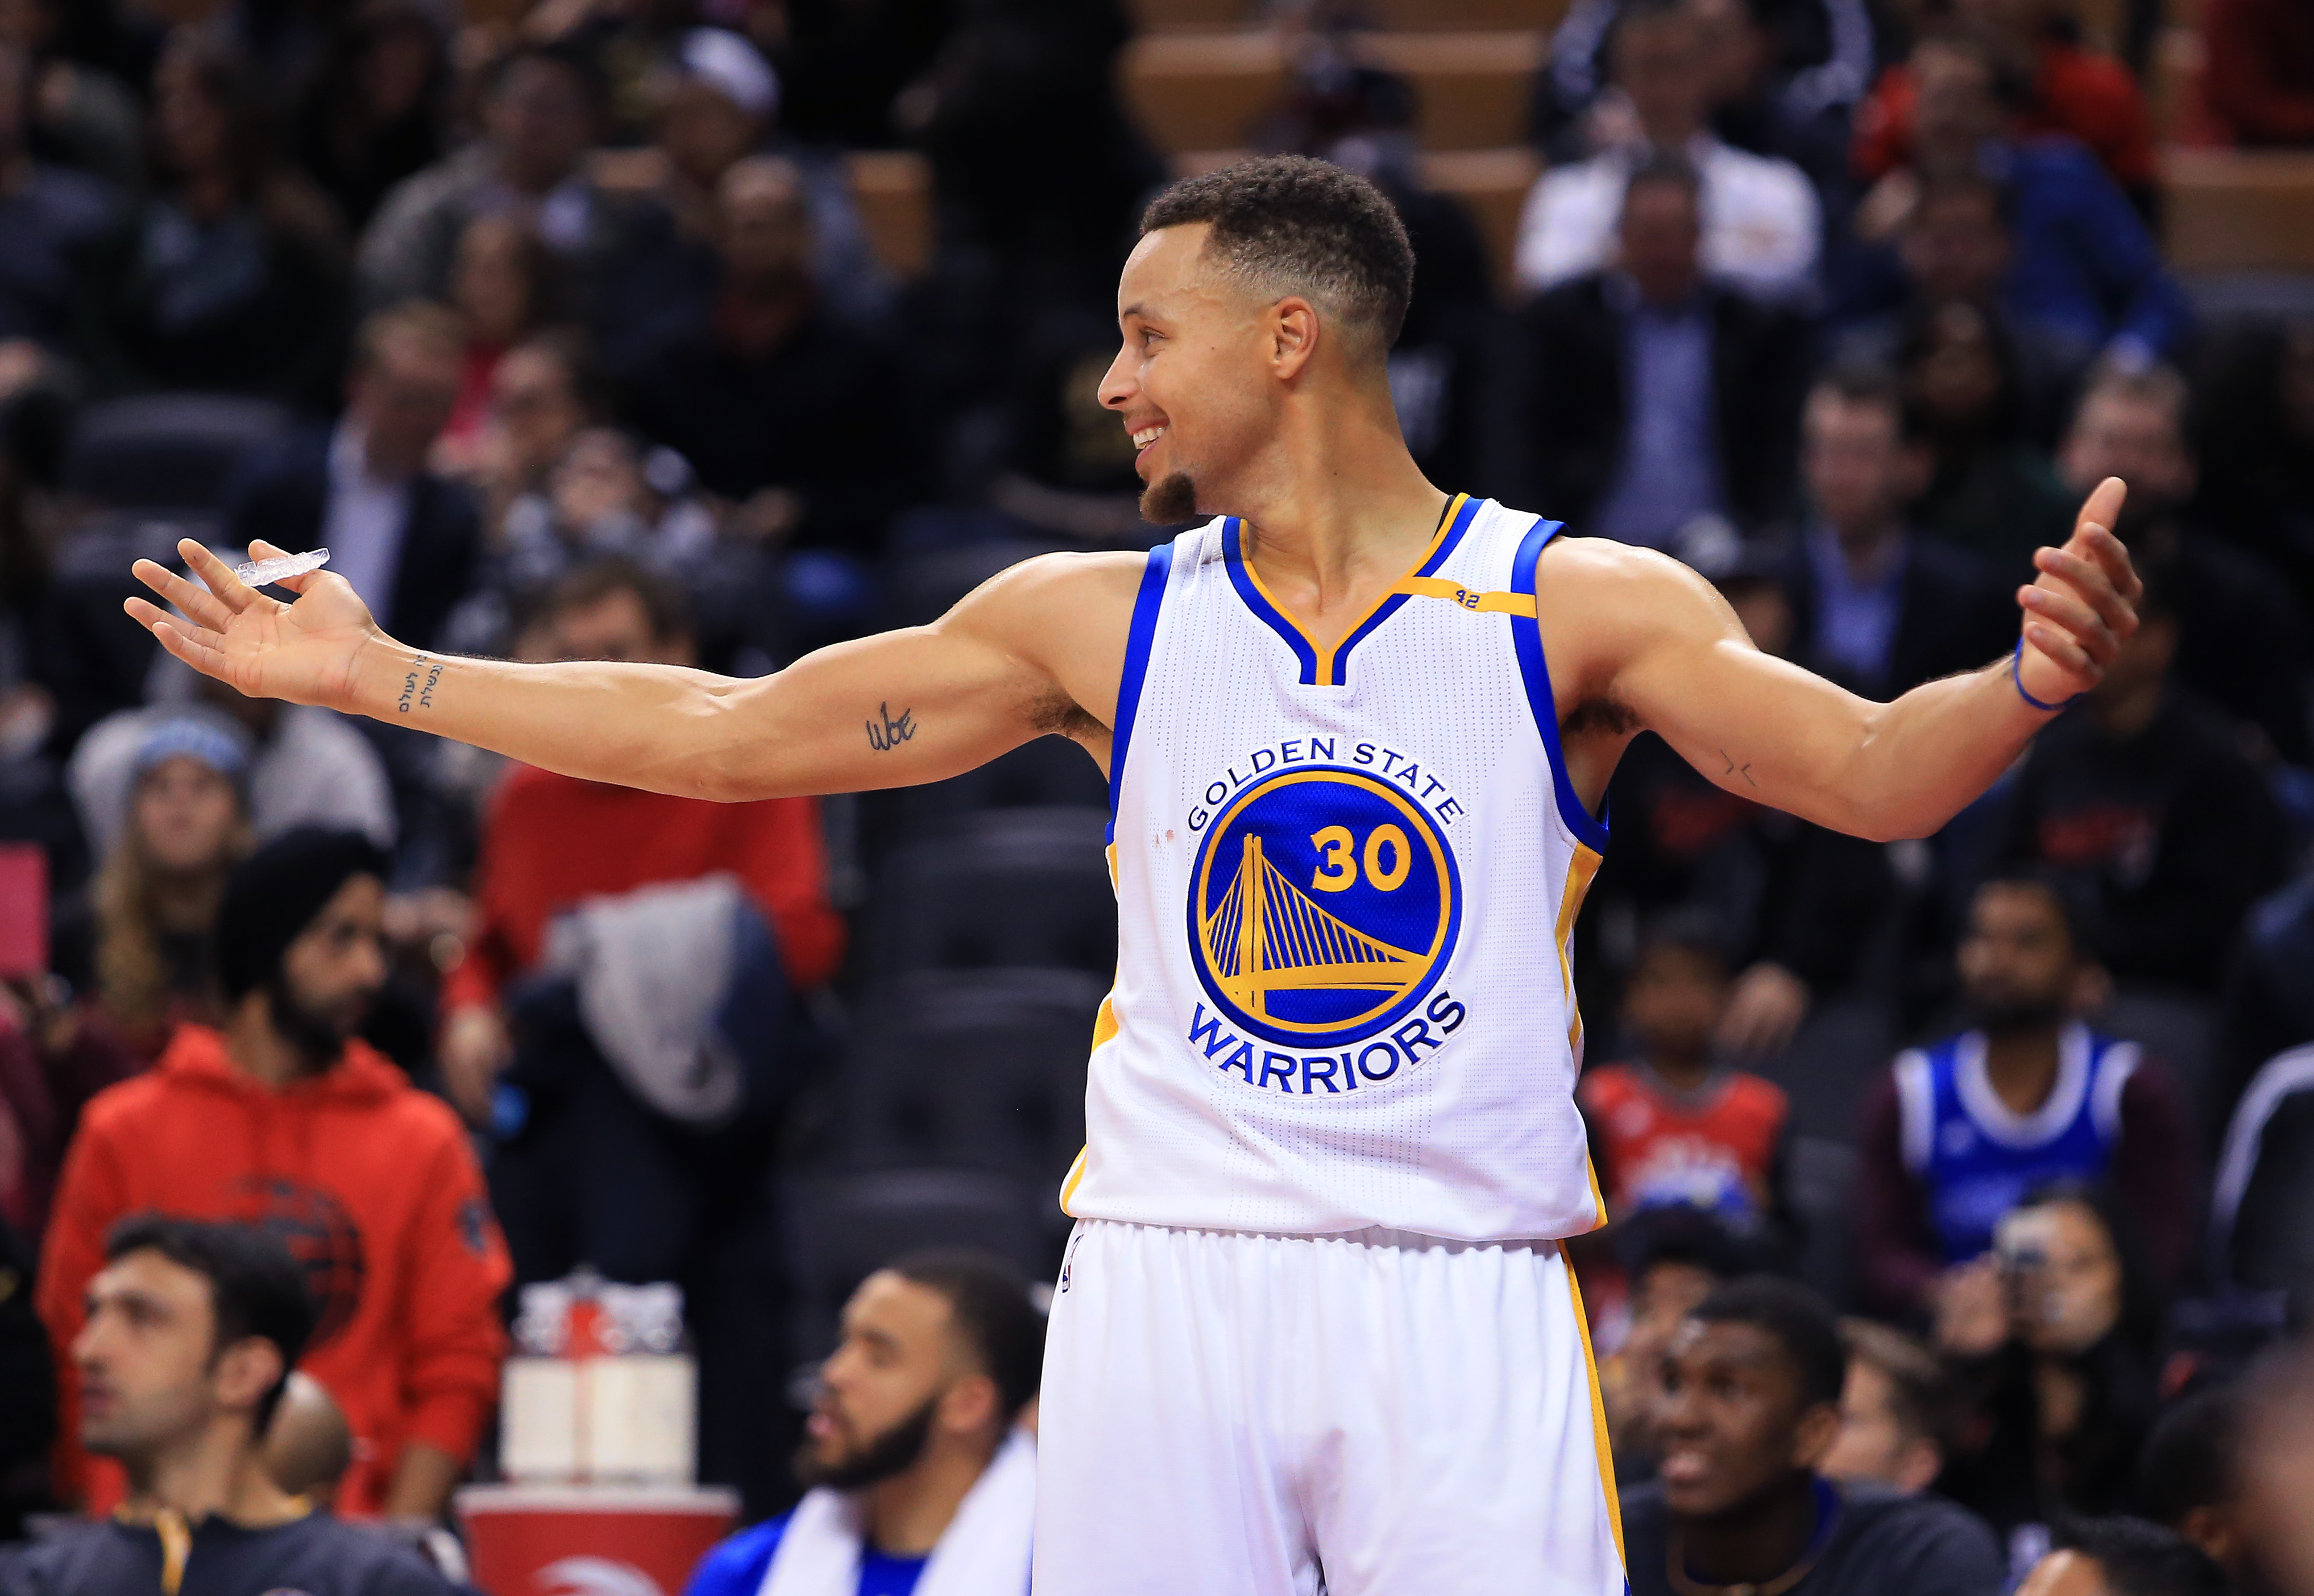 Day-to-Day: We miss the old Steph Curry - The Step Back4070 x 2807